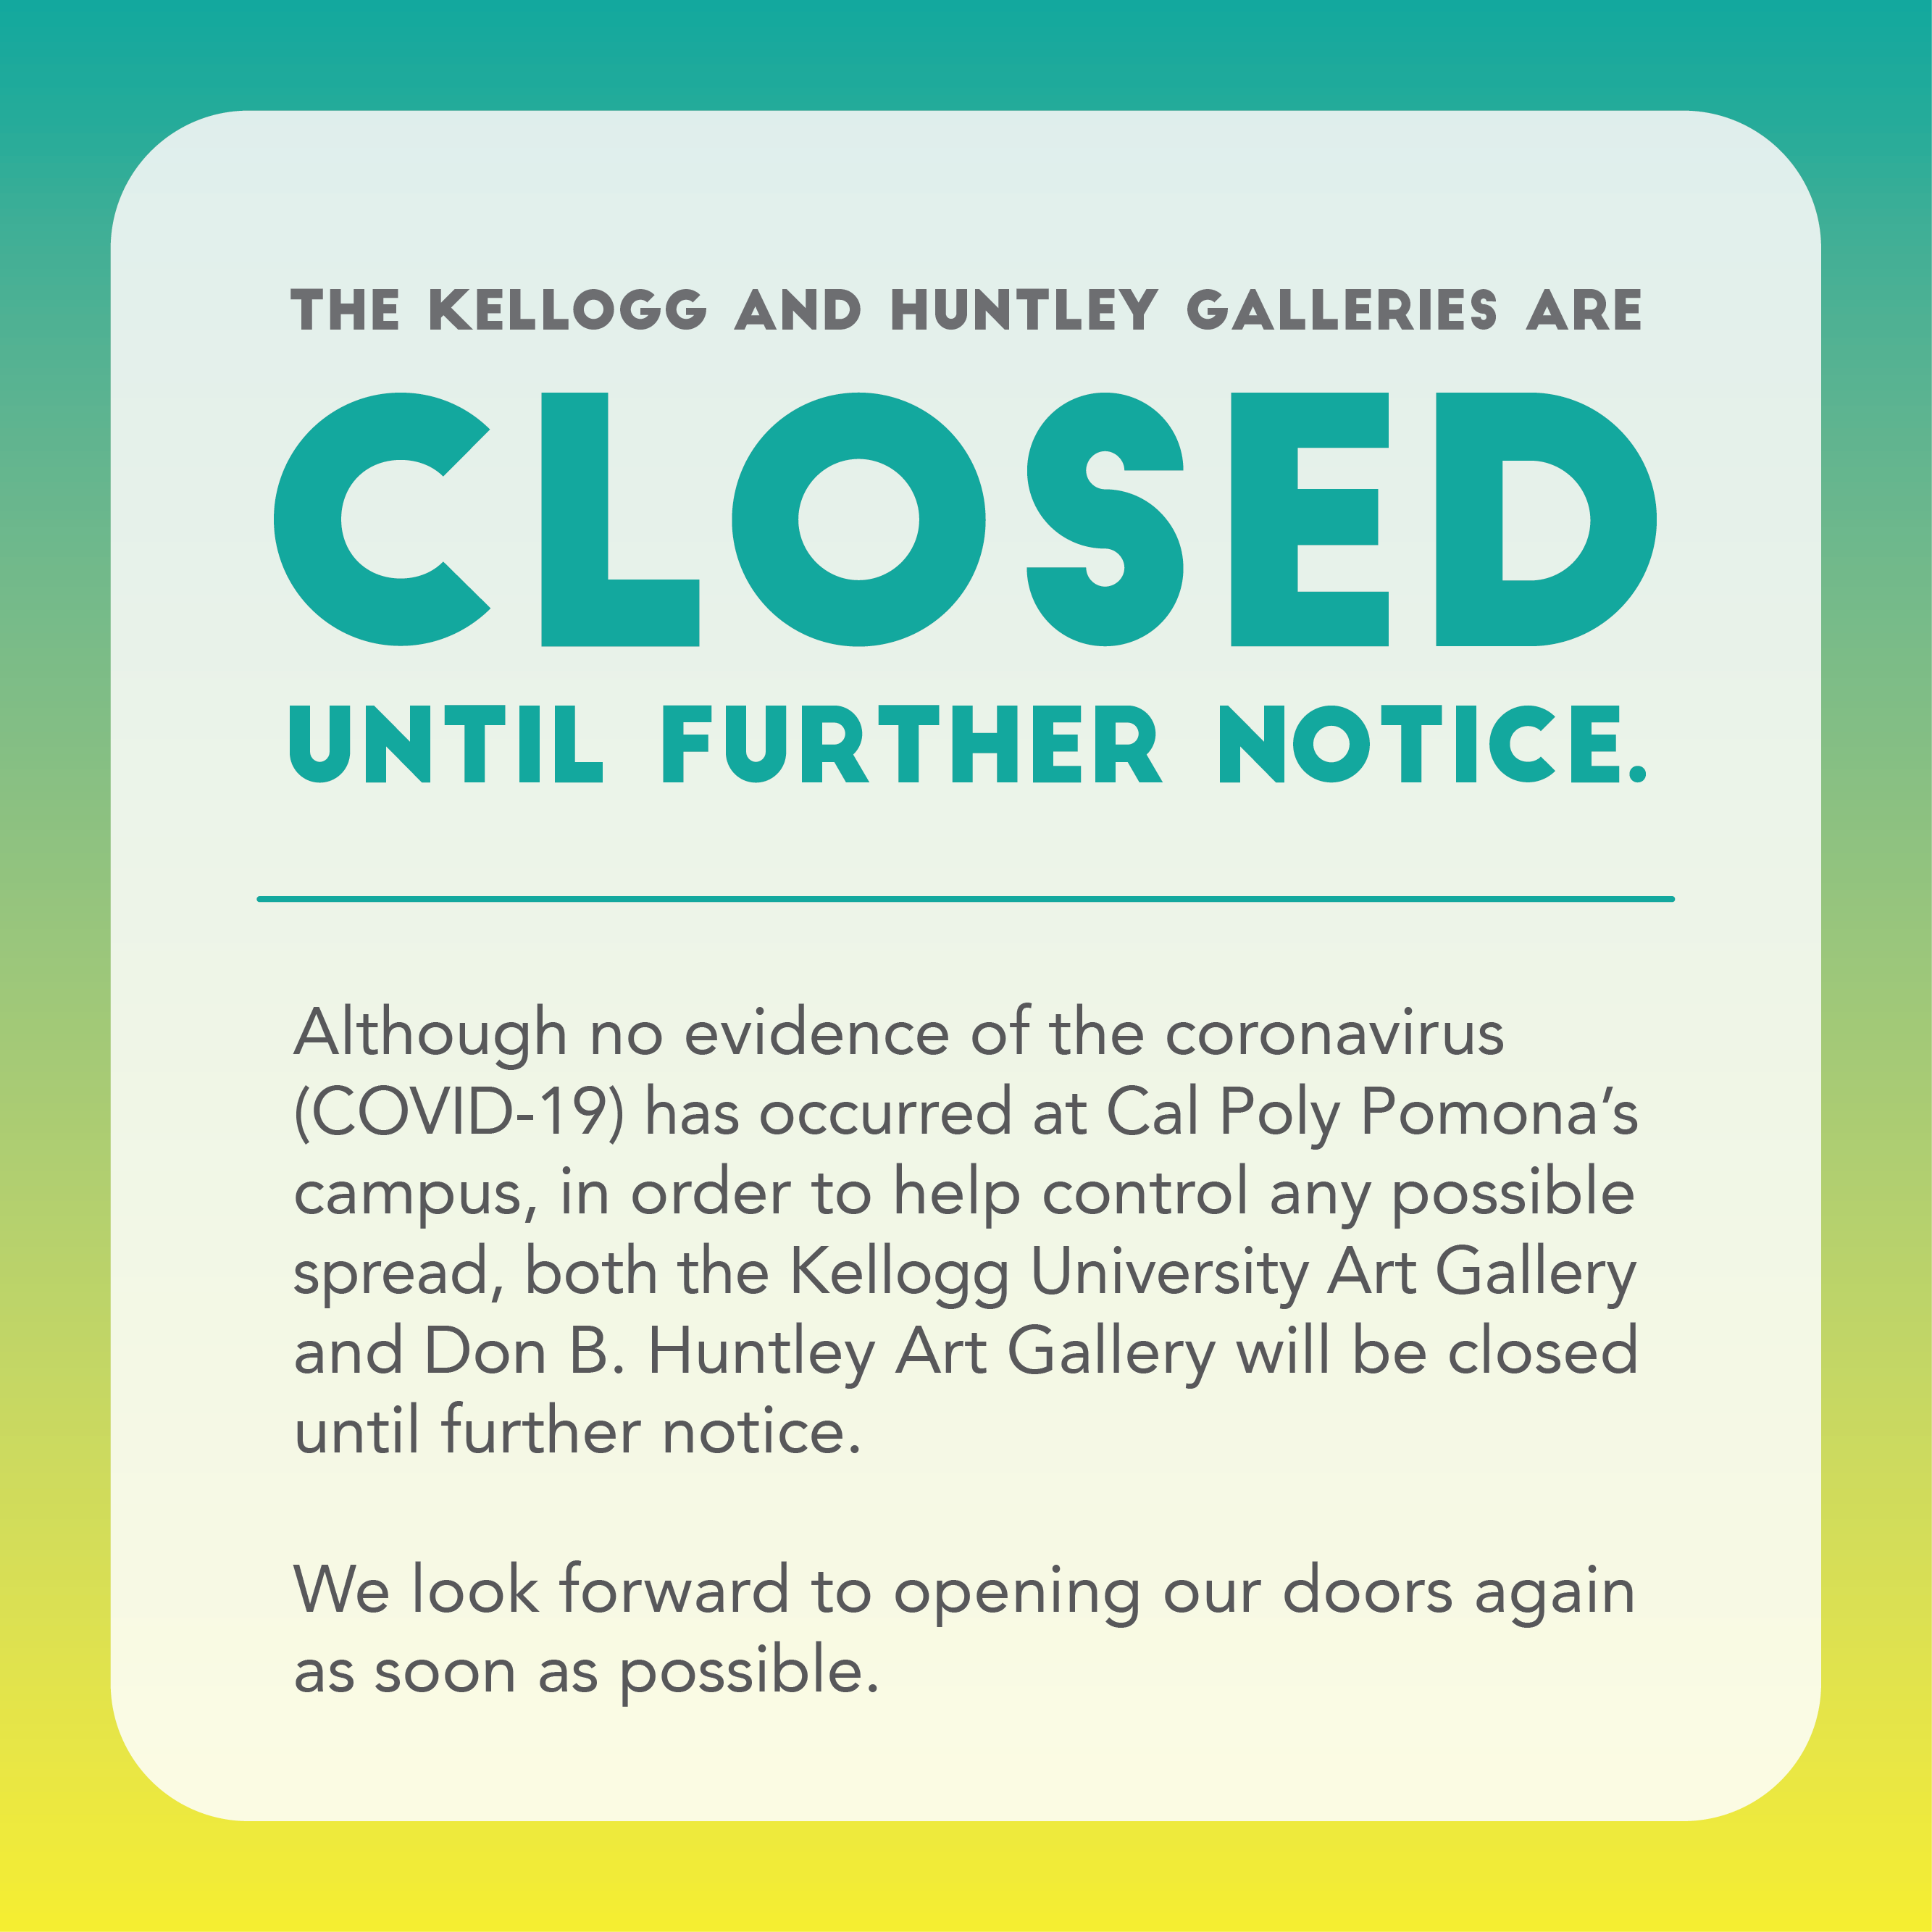 green and yellow graphic with teal and grey text reads: Due to the COVID-19 pandemic, and in order to help control any possible spread, both the Kellogg University Art Gallery and the Don B. Huntley Gallery will be closed until further notice.  We look forward to opening our doors again as soon as possible.